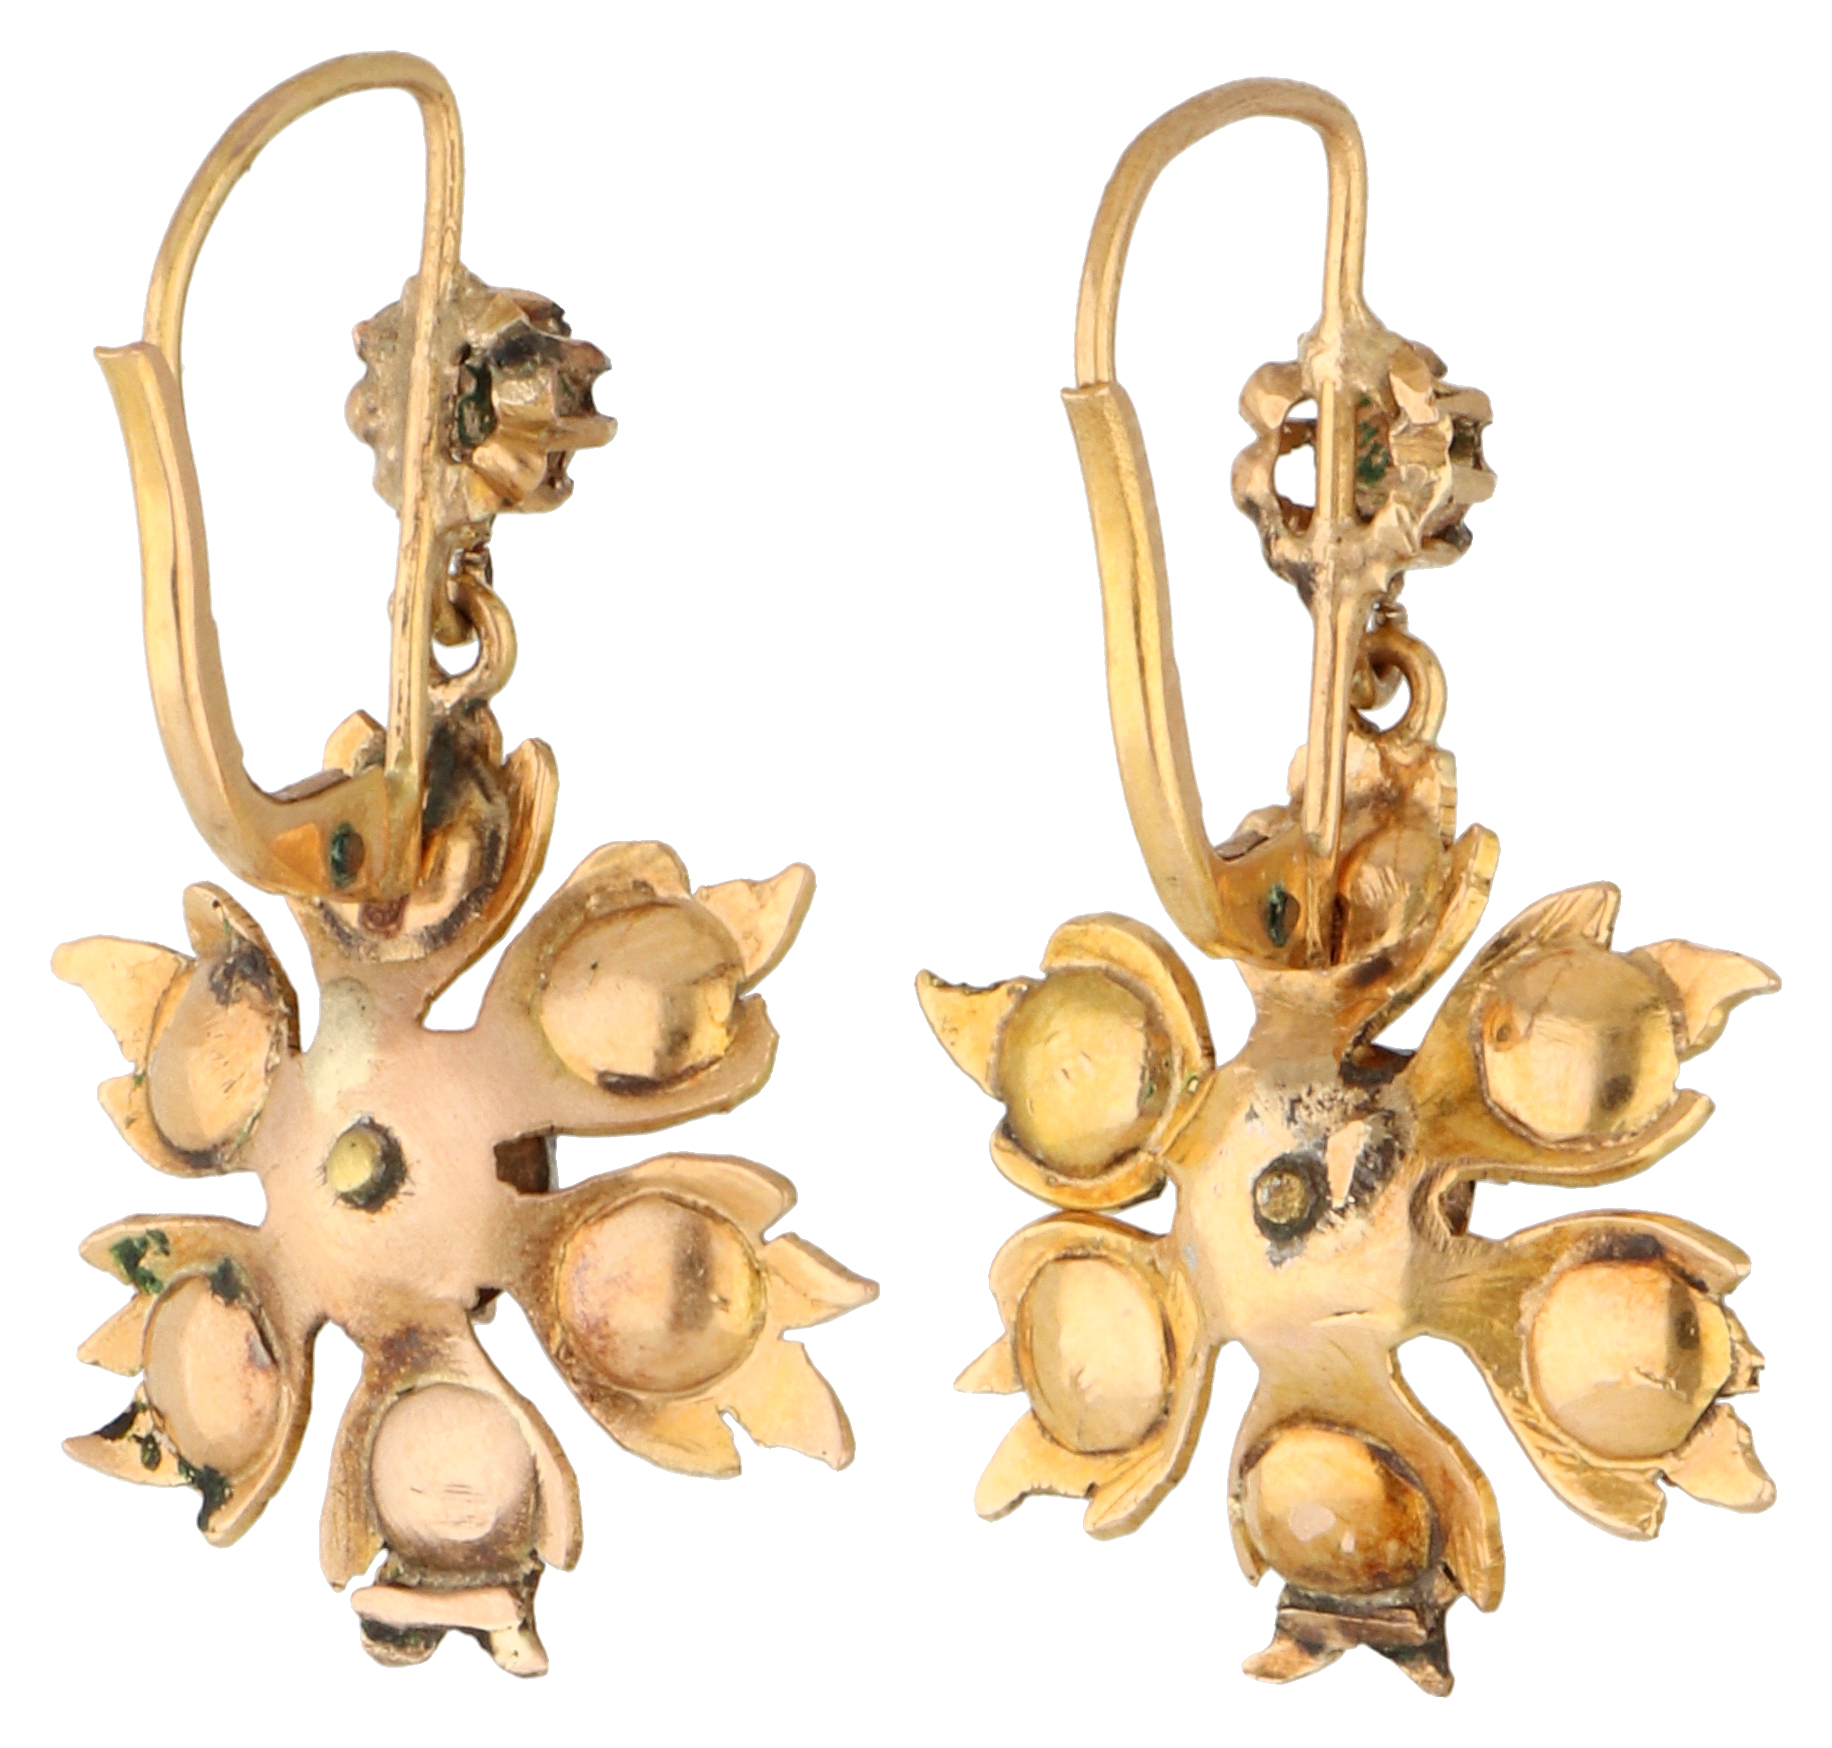 No Reserve - 14K Yellow Gold antique dormeuse earrings depicting a flower set with rose cut diamonds - Image 2 of 2